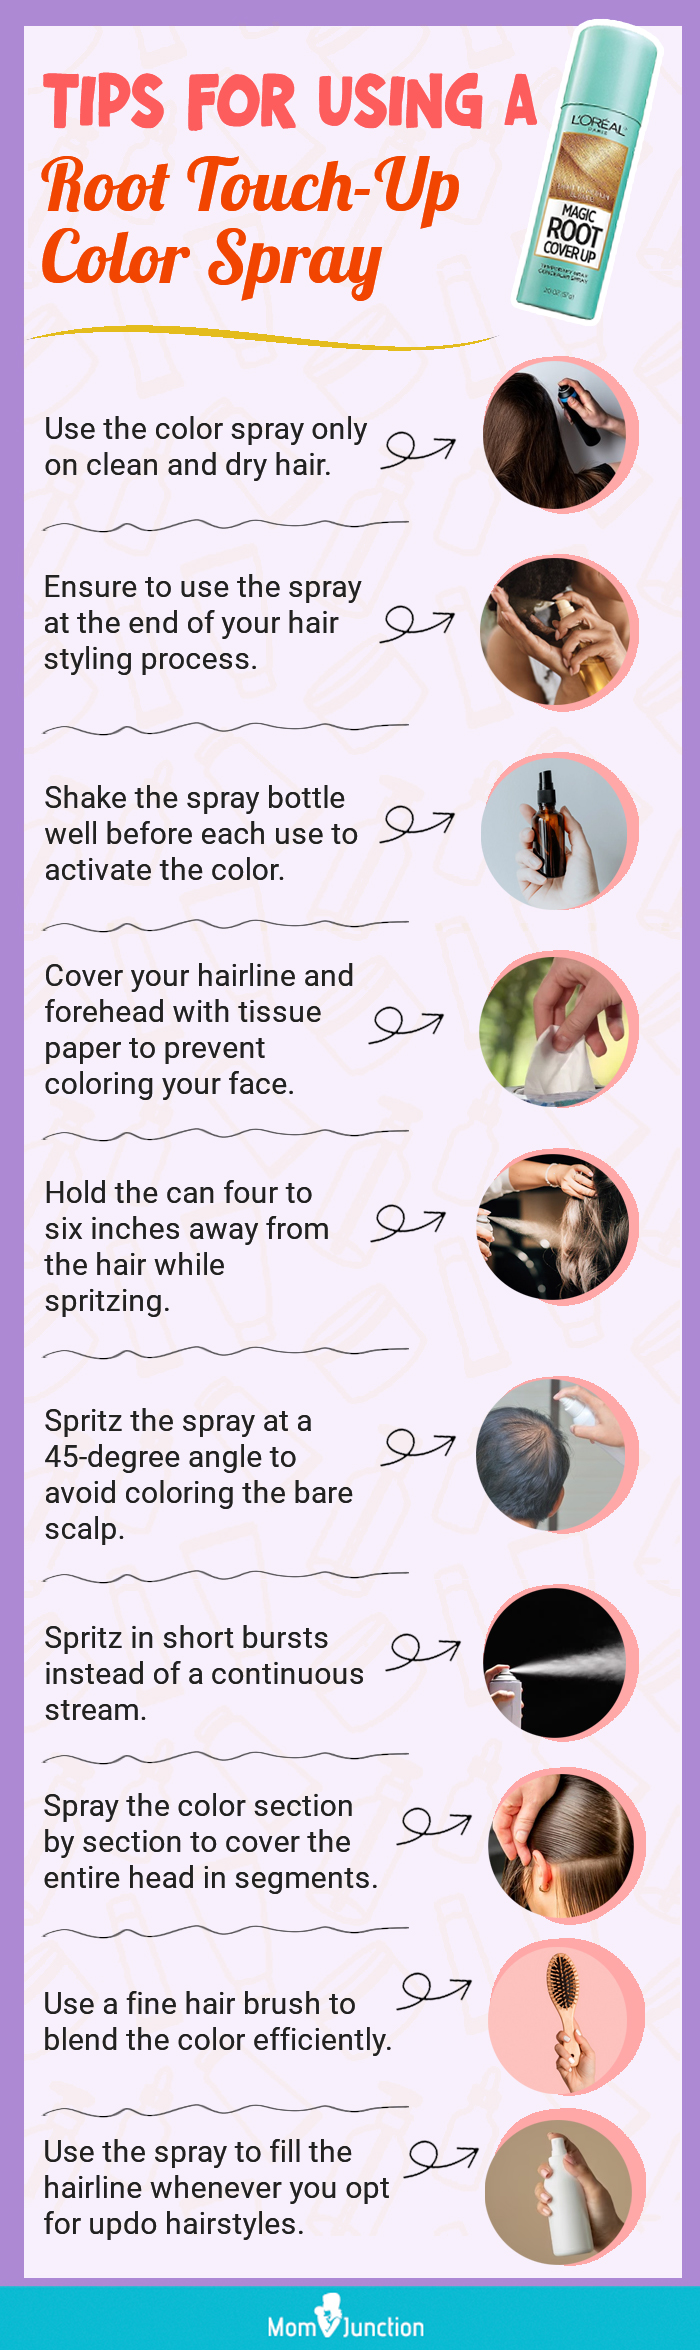 Tips For Using A Root Touch-Up Color Spray (infographic)